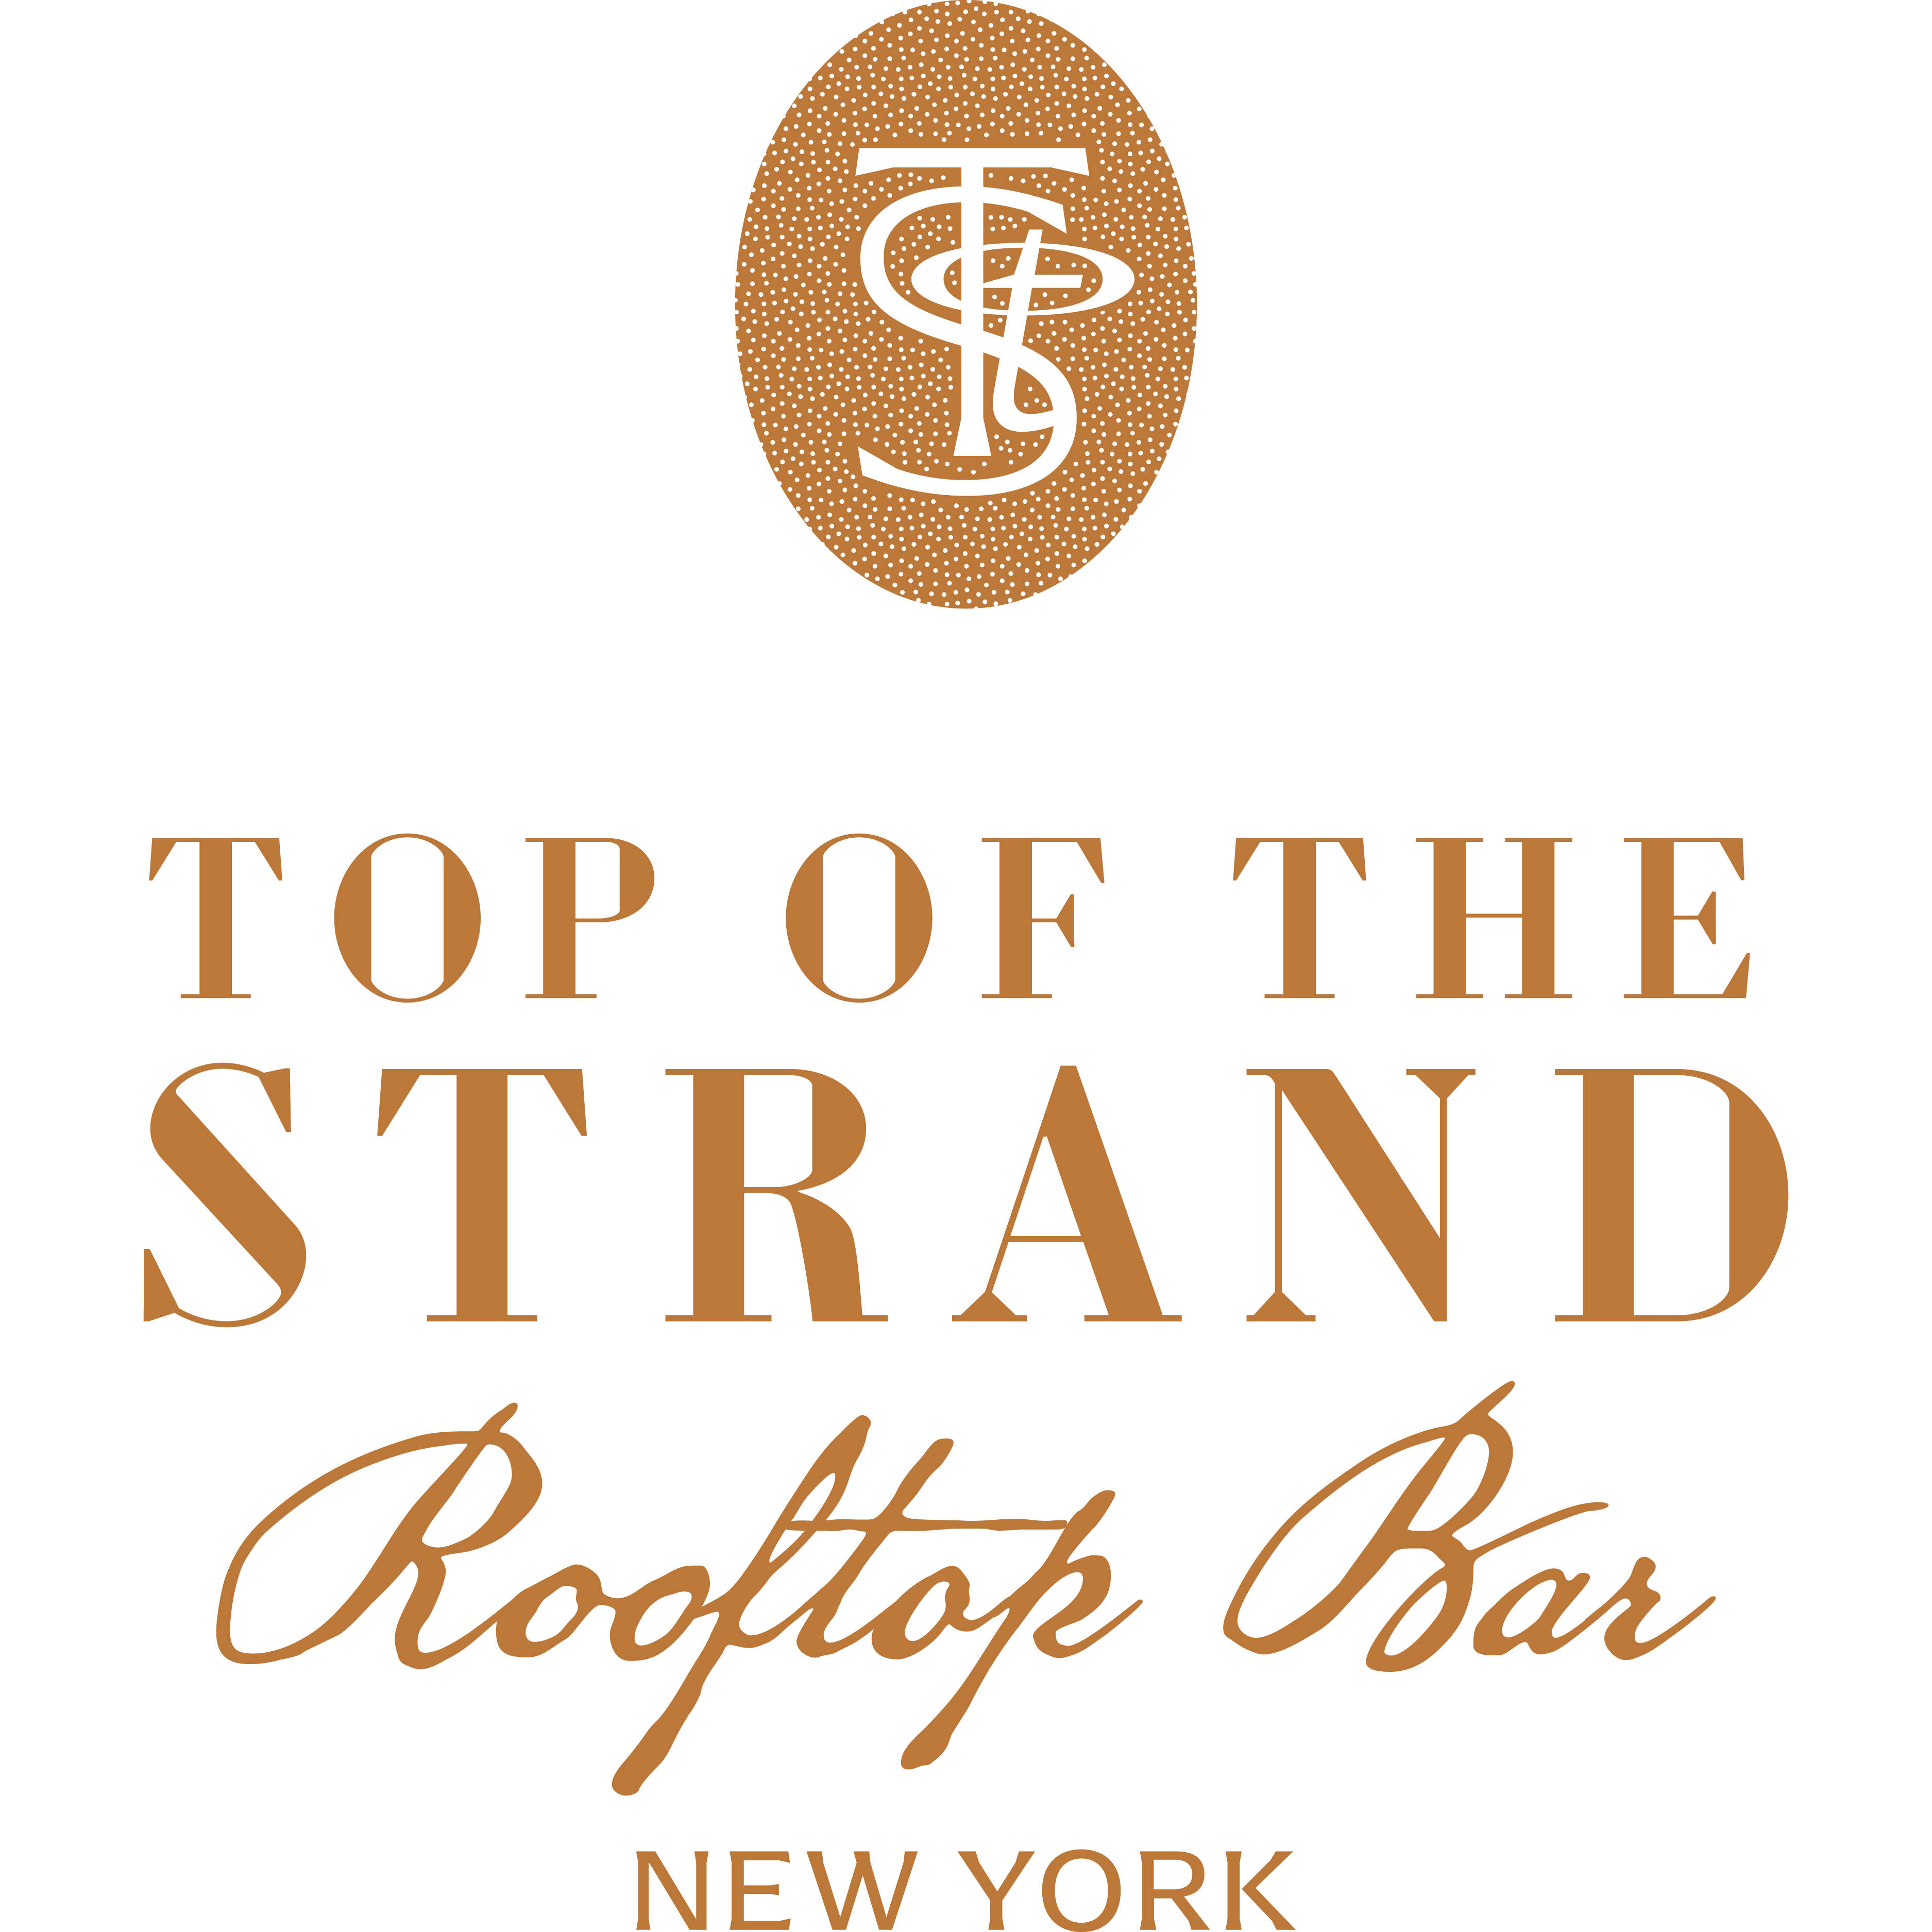 Top of The Strand Logo logo design by logo designer Daniel Fernandez for your inspiration and for the worlds largest logo competition